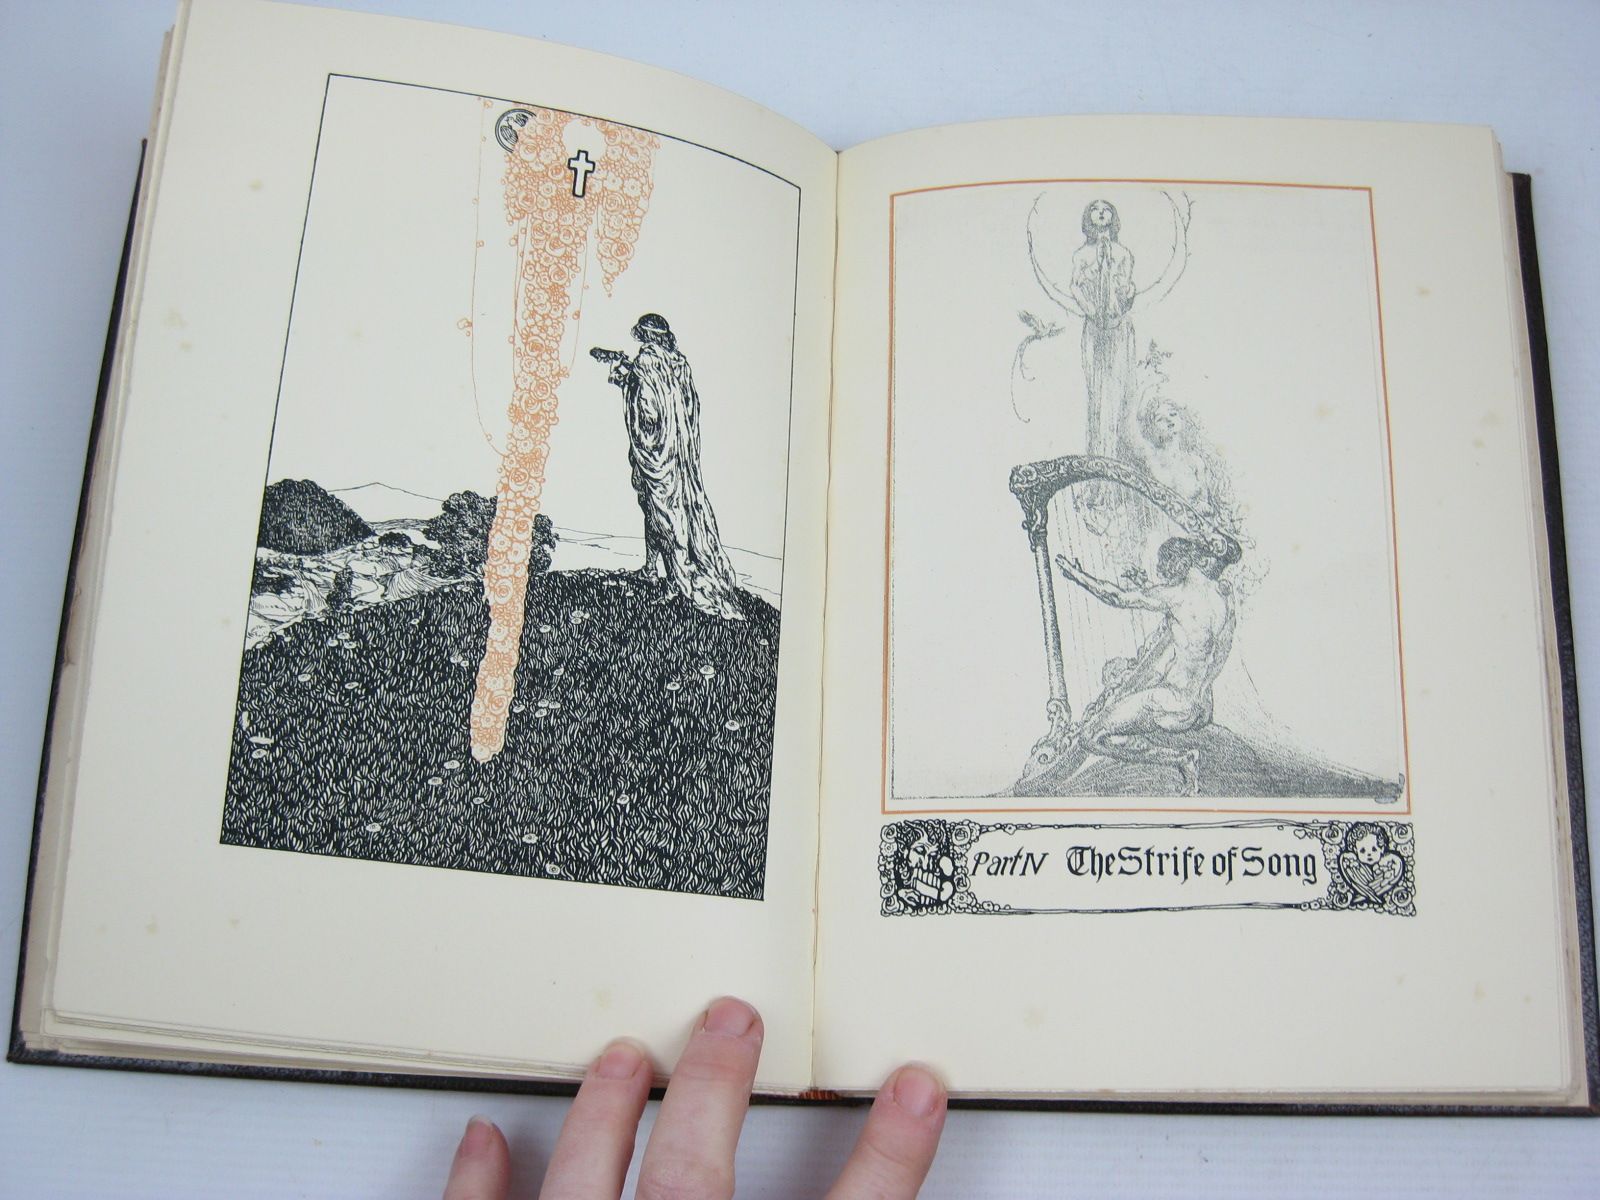 Photo of TANNHAUSER written by Wagner, Richard
Rolleston, T.W. illustrated by Pogany, Willy published by George G. Harrap & Co. Ltd. (STOCK CODE: 1314507)  for sale by Stella & Rose's Books